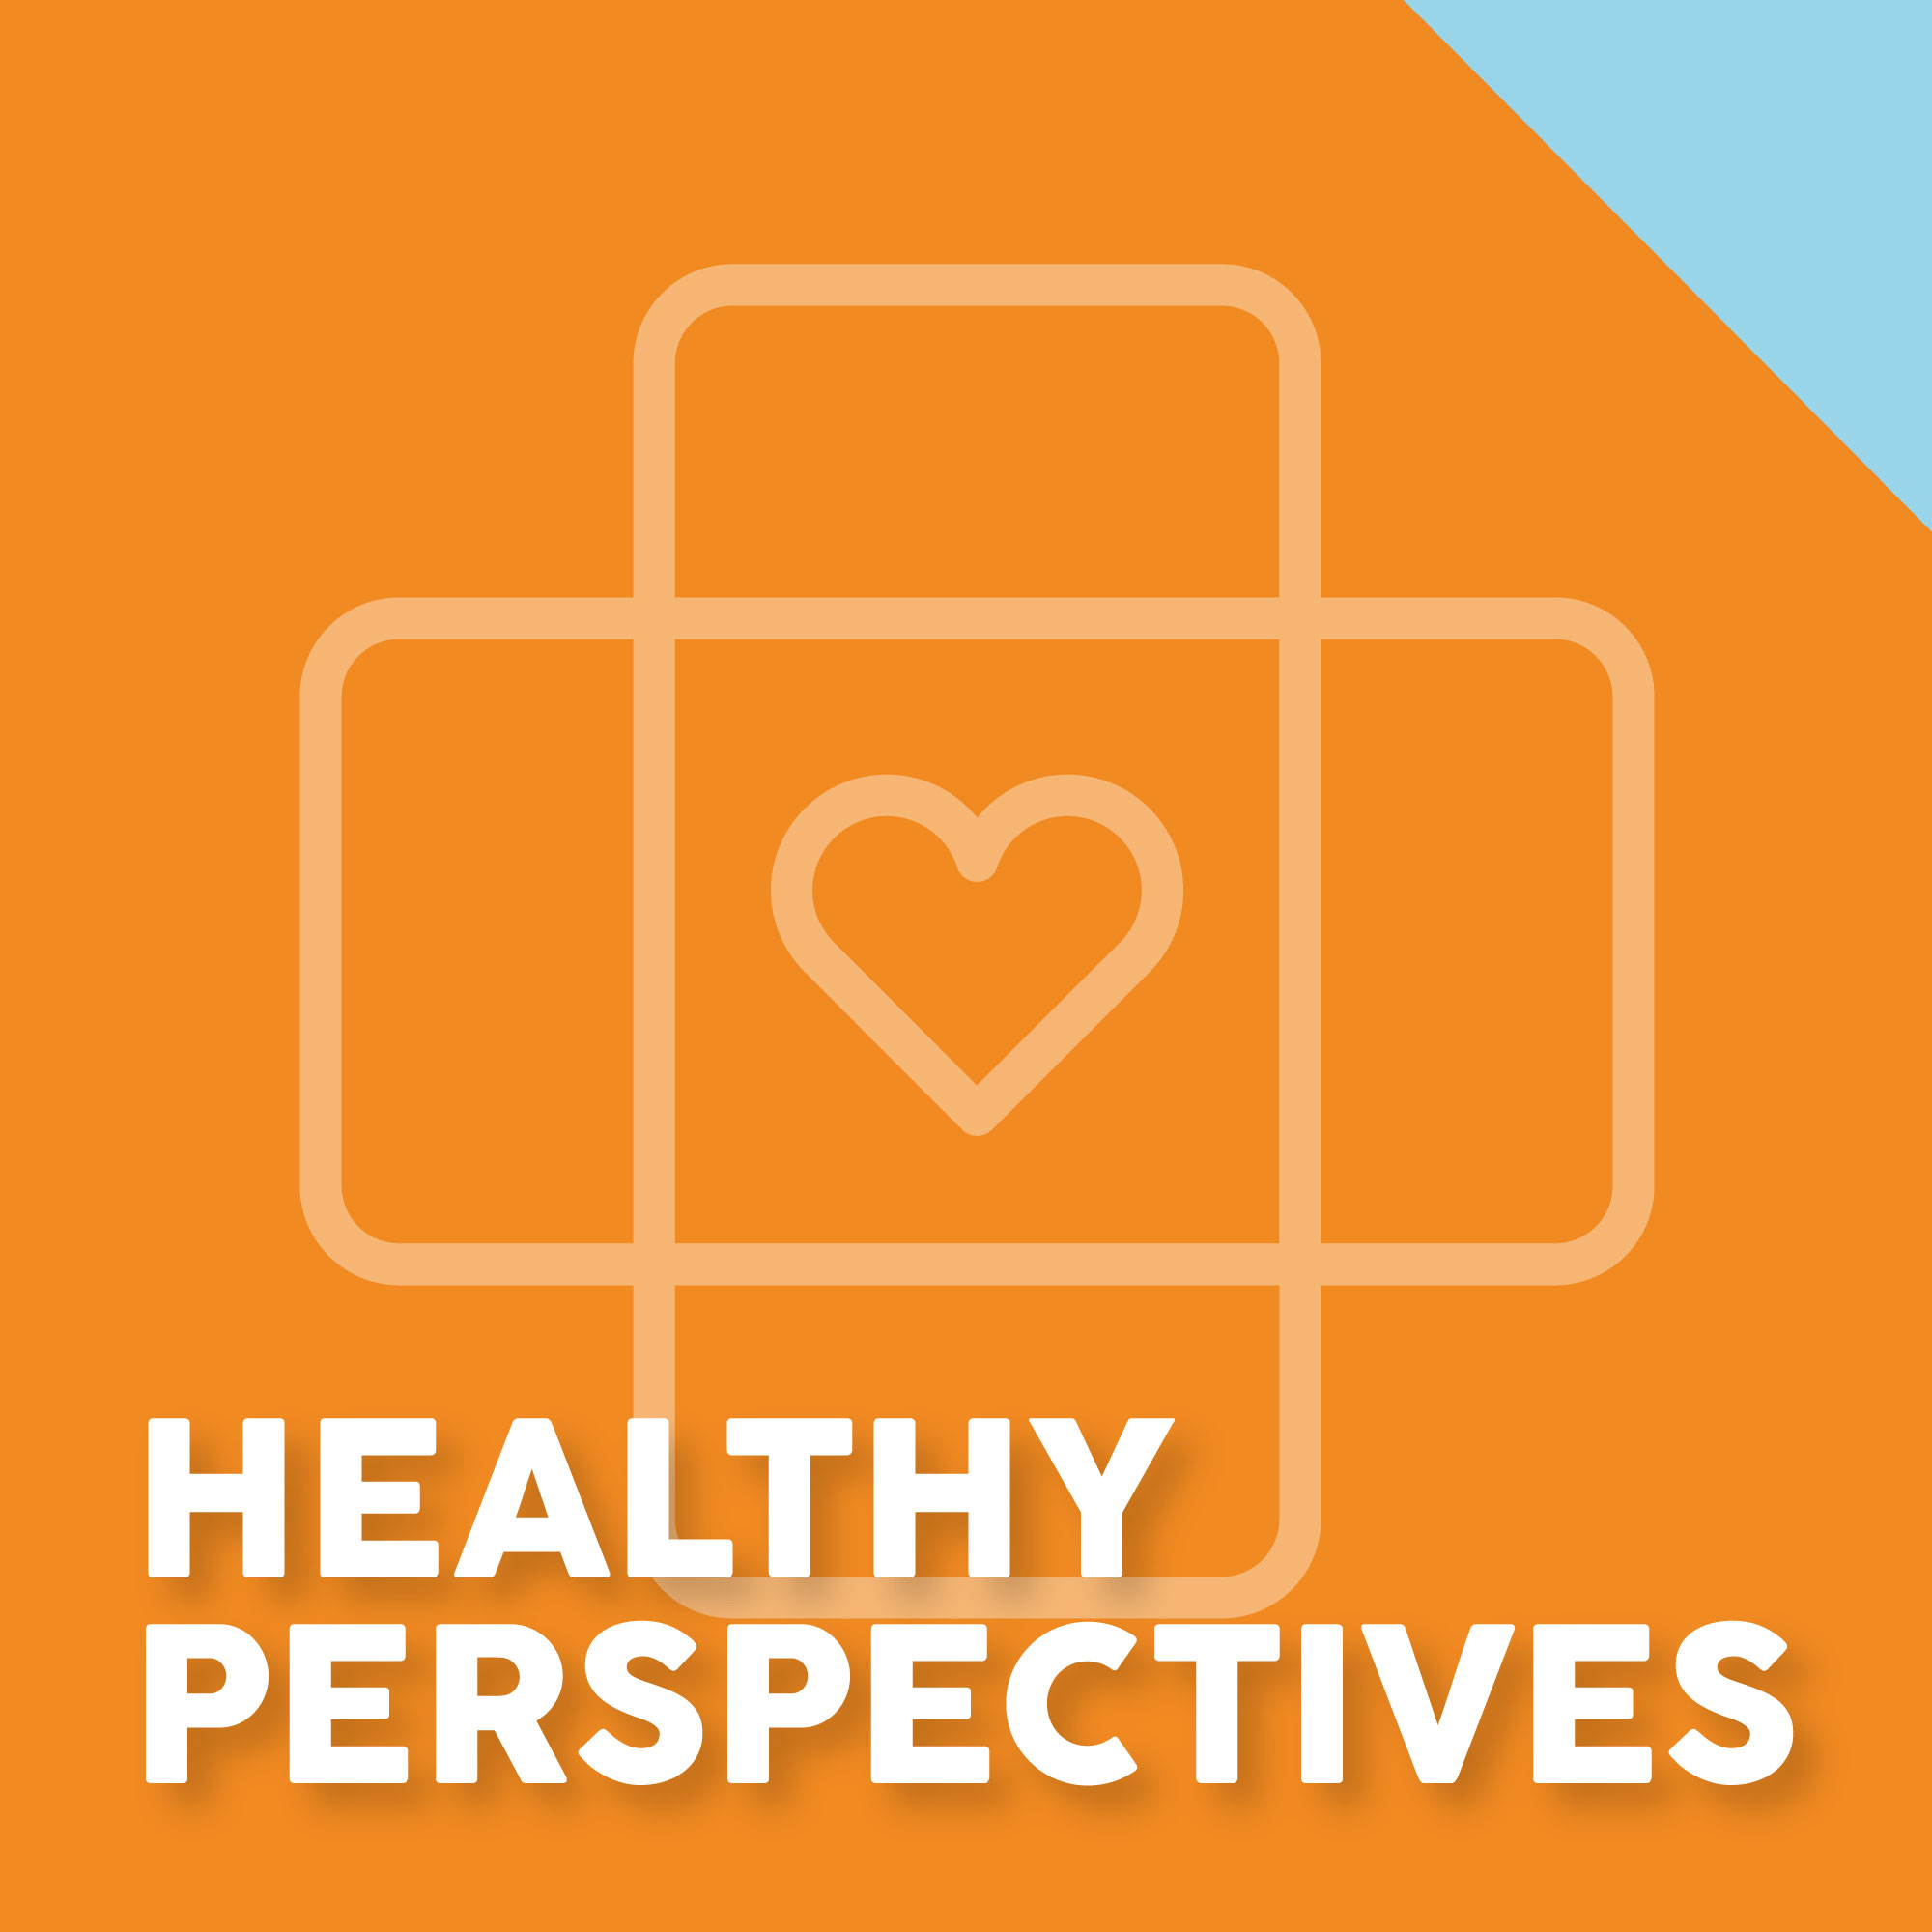 Patient Perspectives on COVID-19 and Implications for Marketers